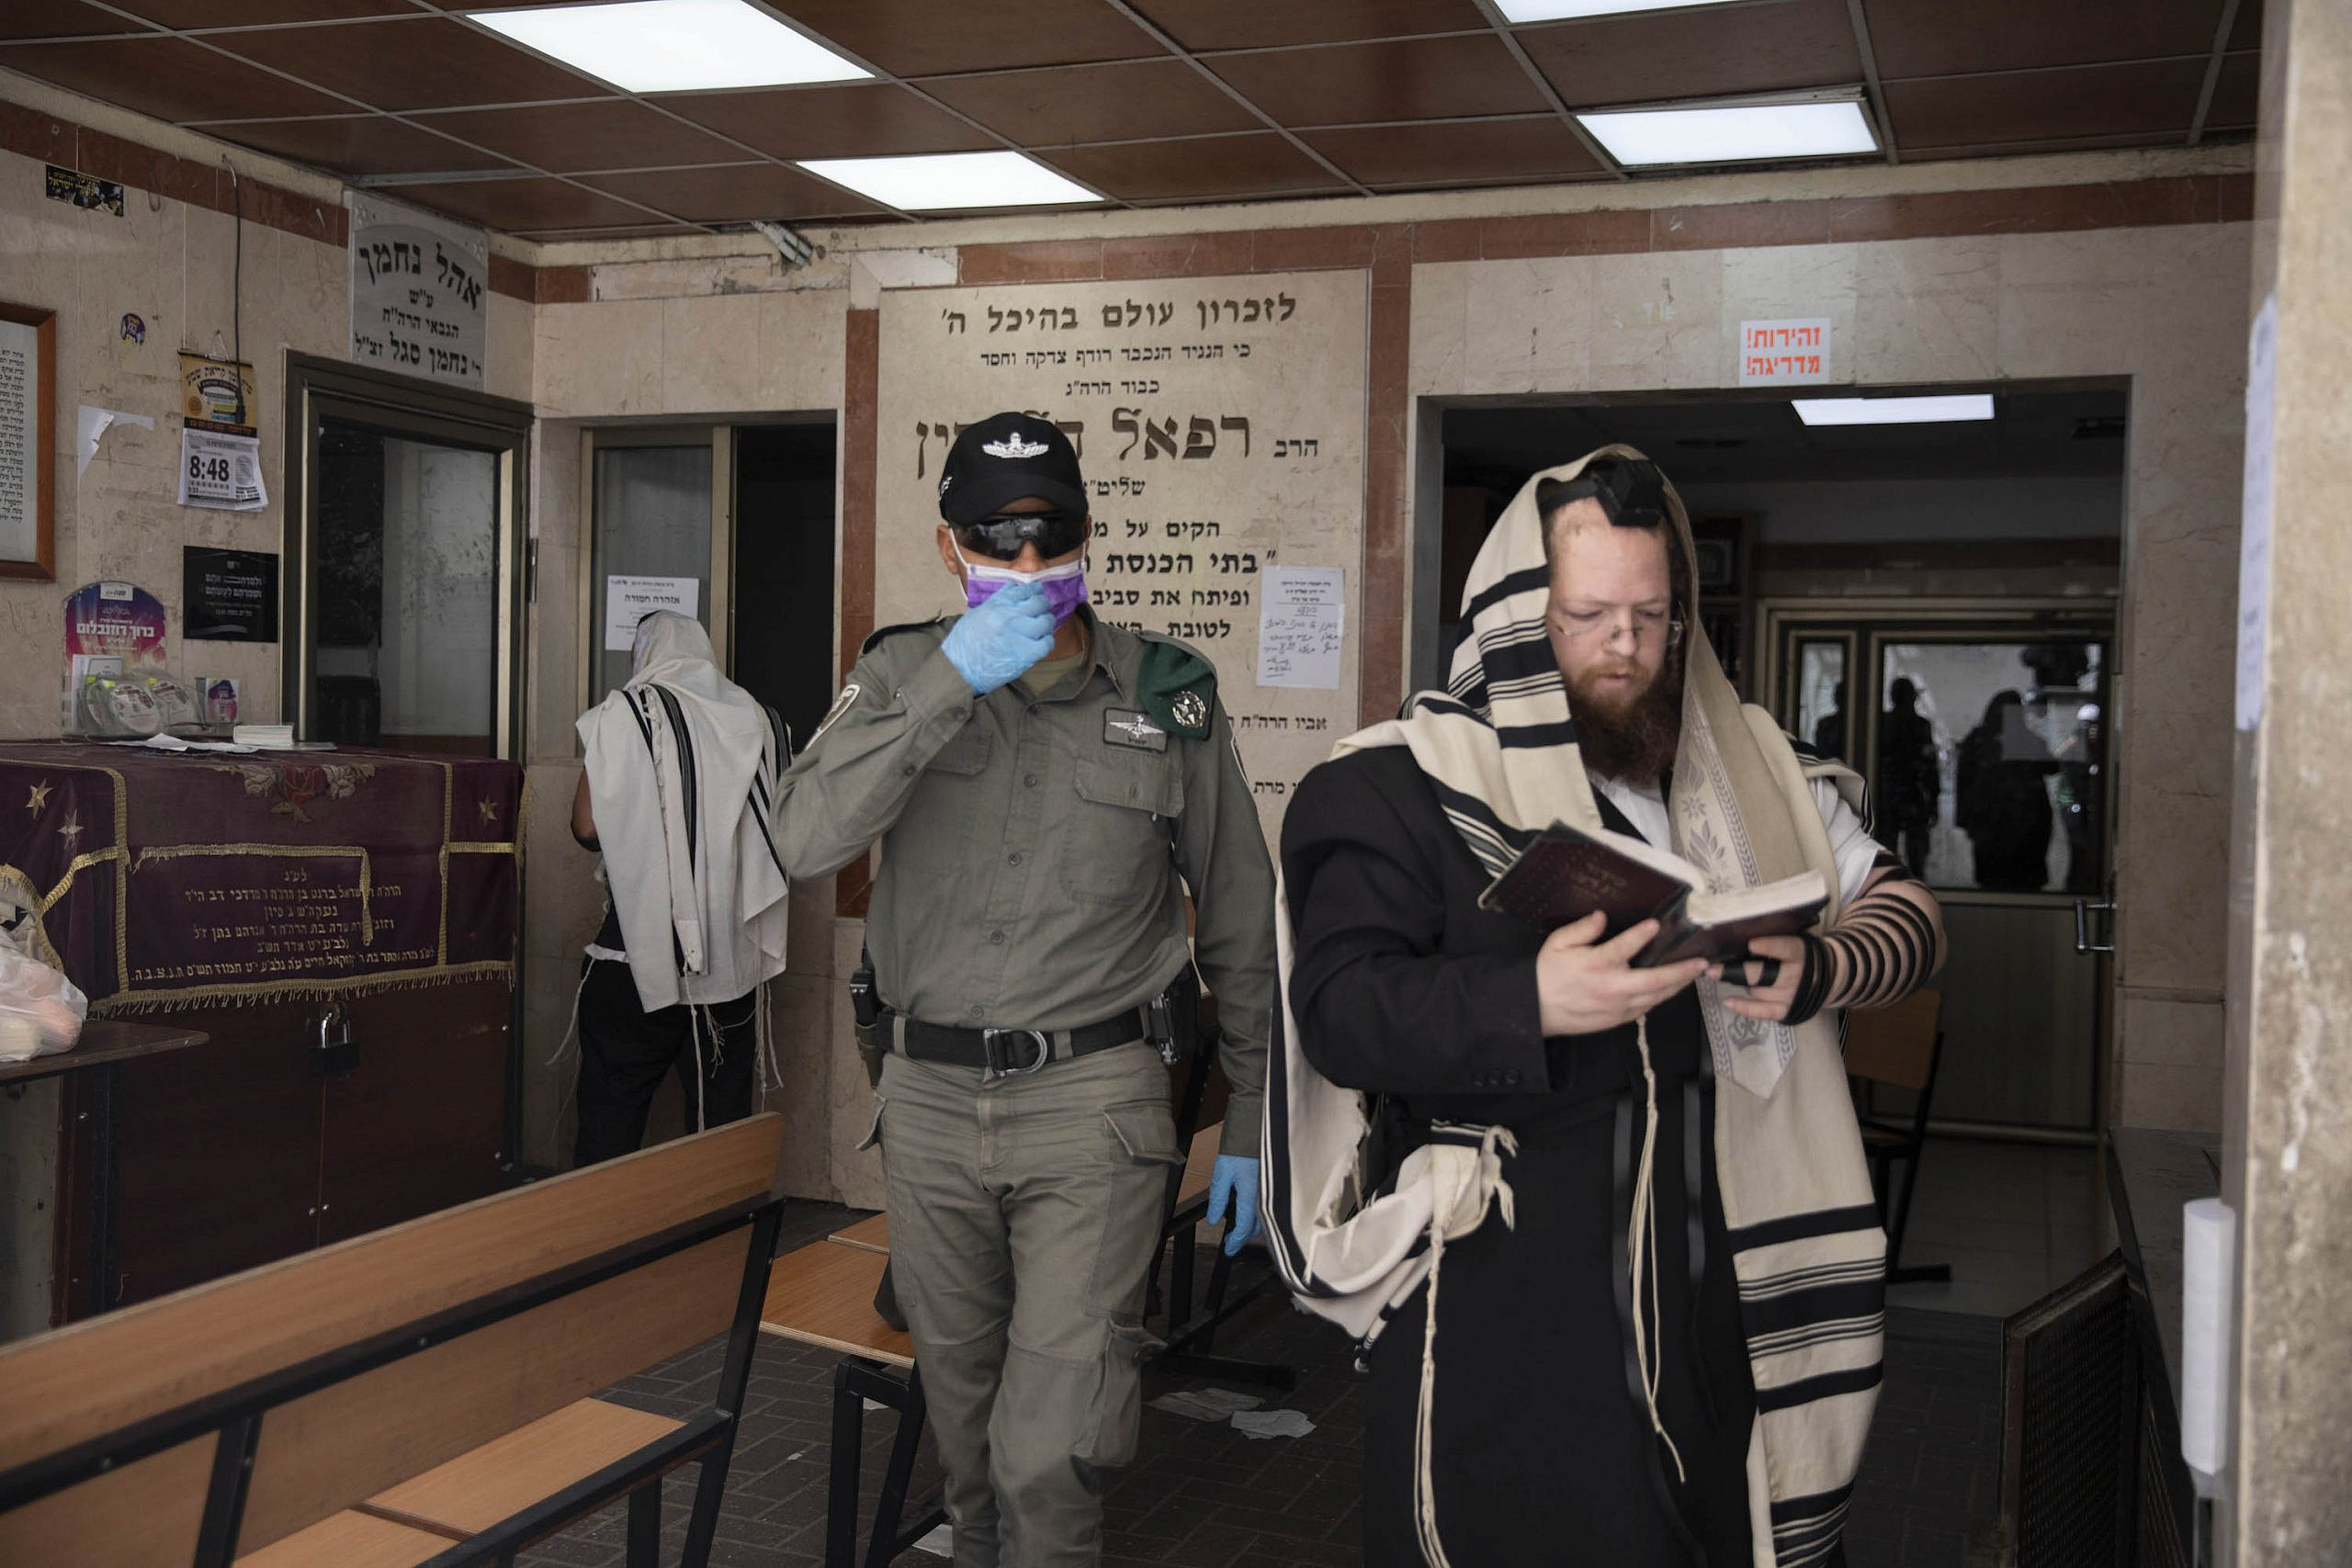 Israeli police patrol in the ultra-orthodox city of Bnei Brak, March 30, 2020. The government ordered a partial lockdown of the city in order to prevent the spread of the Coronavirus. (Oren Ziv)